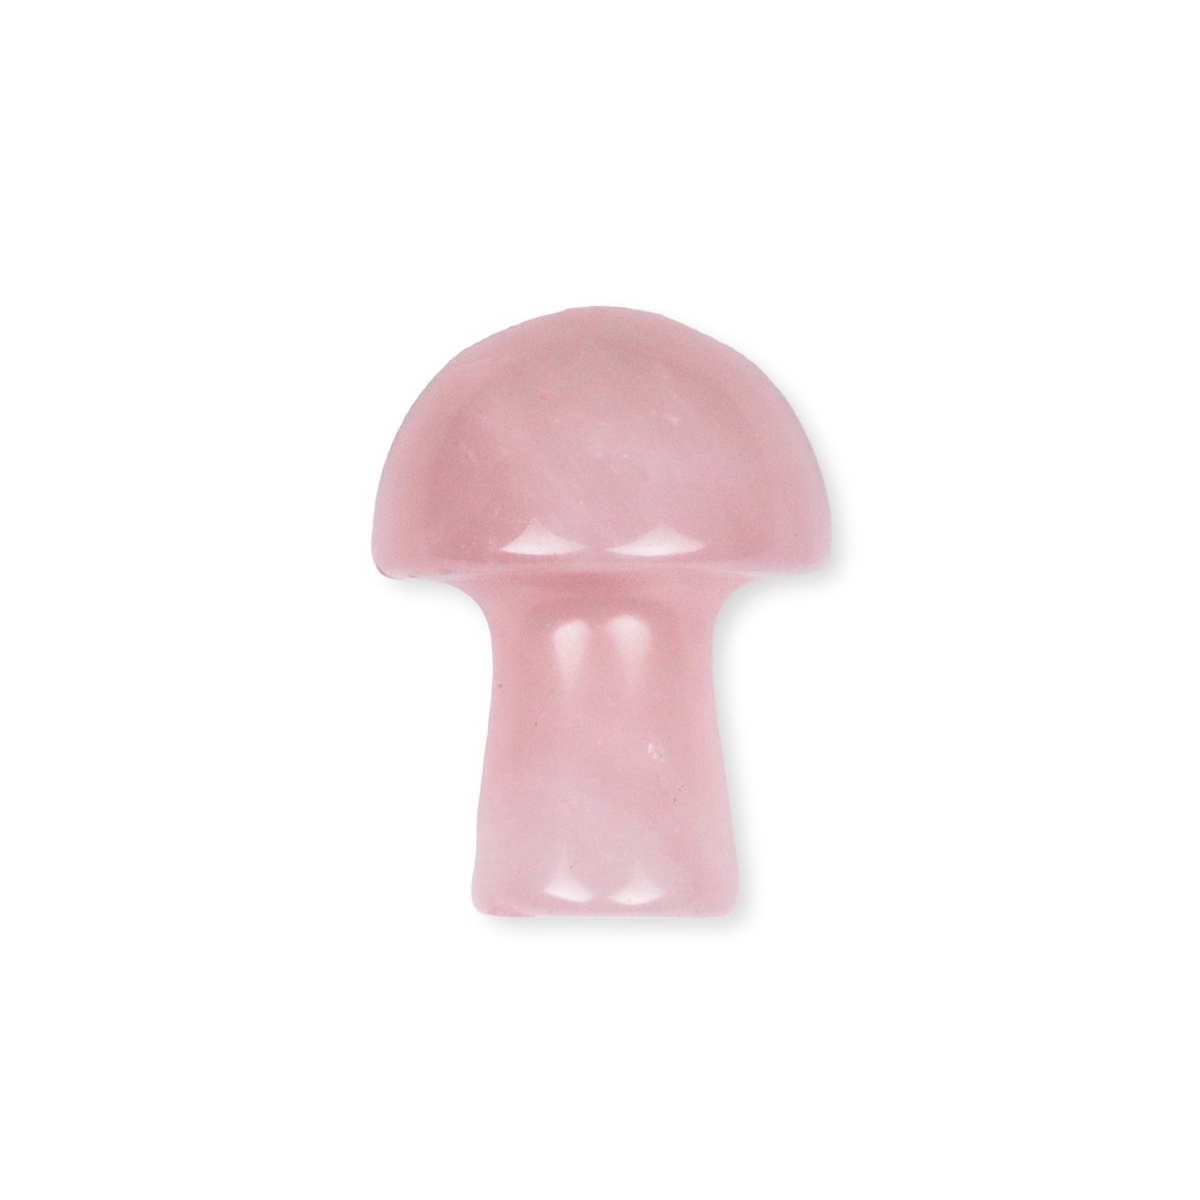 a pink plastic mushroom on a white background